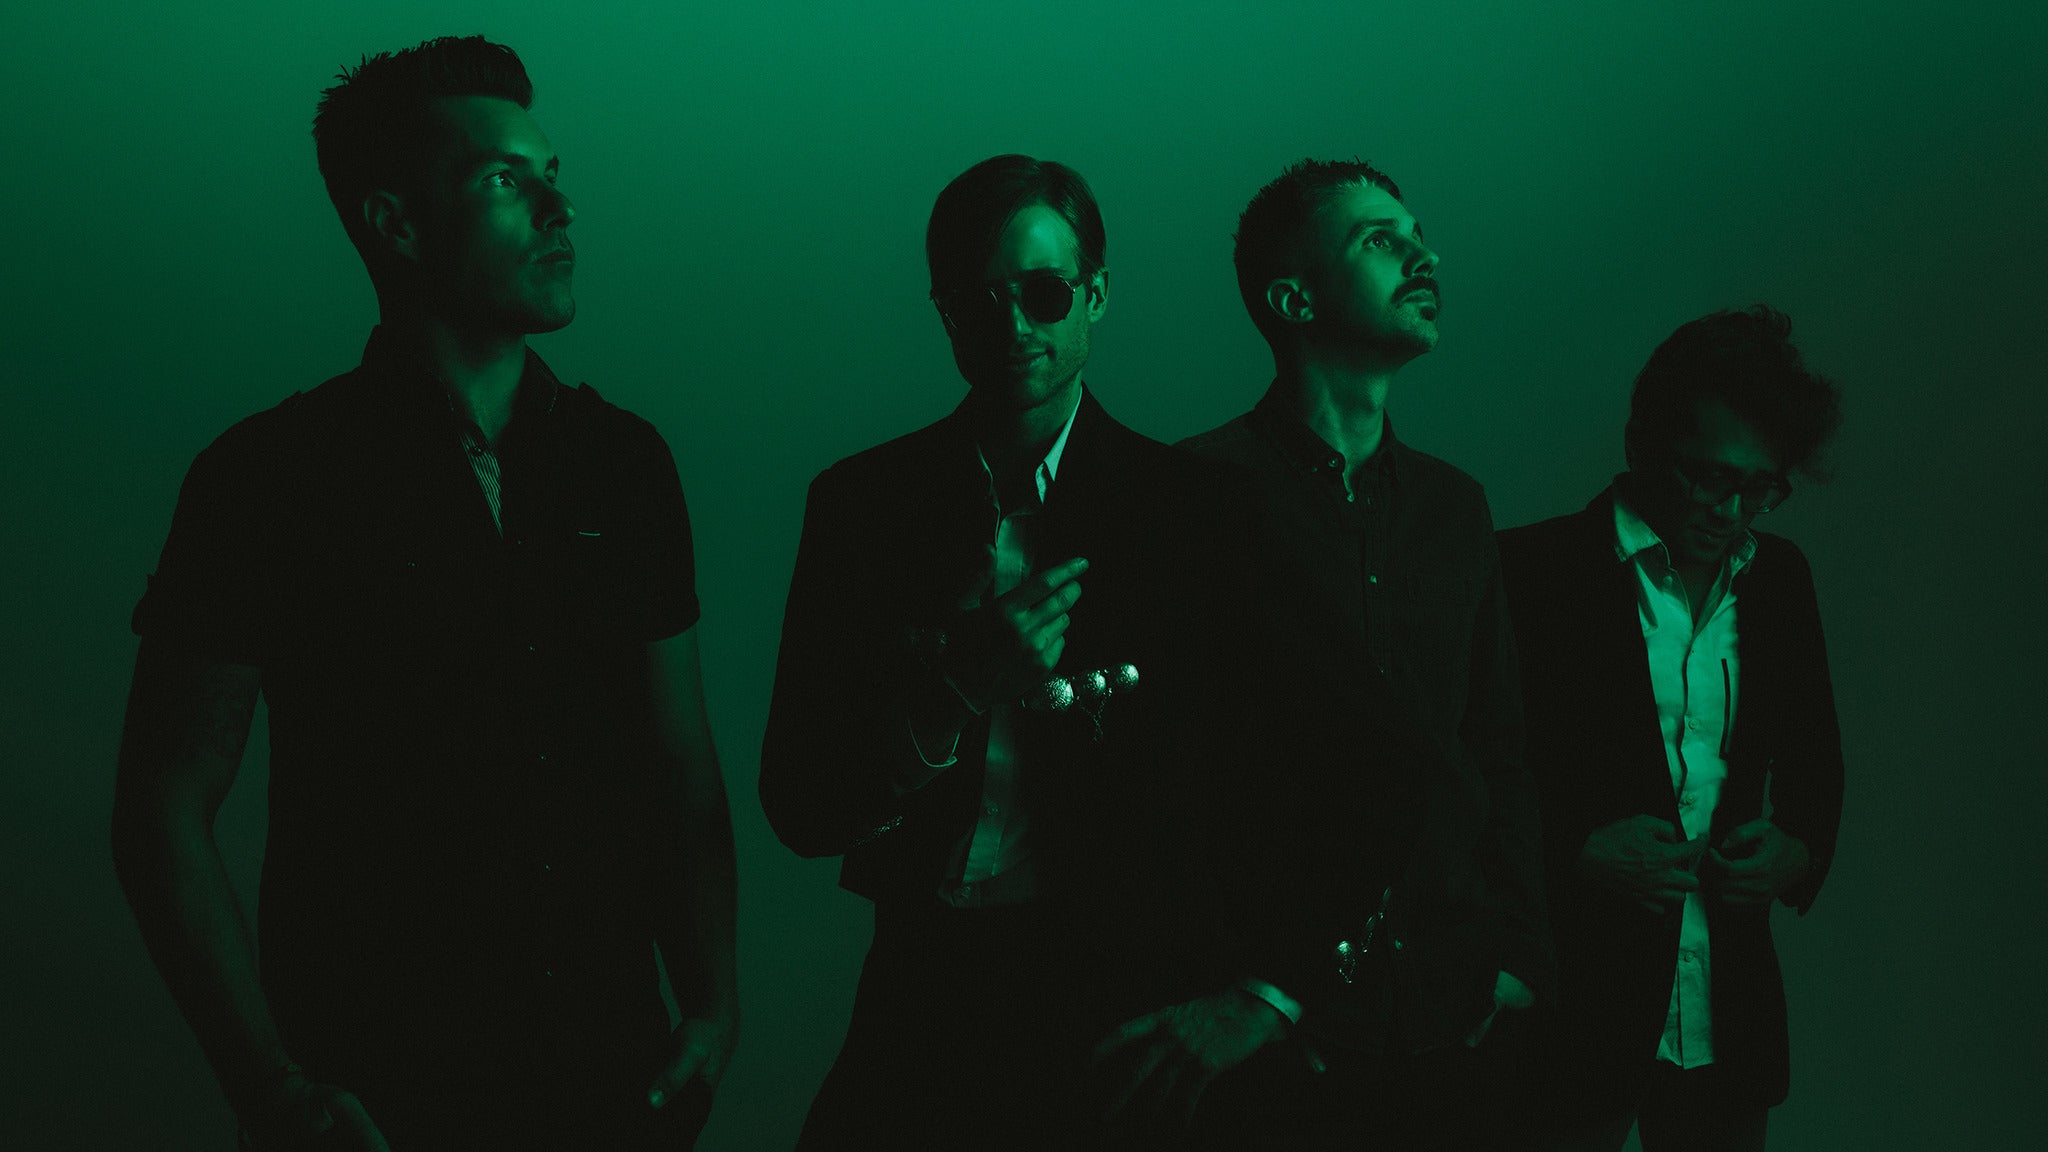 Panic! At The Disco - Death of A Bachelor Tour in Oakland promo photo for VIP Package Onsale presale offer code